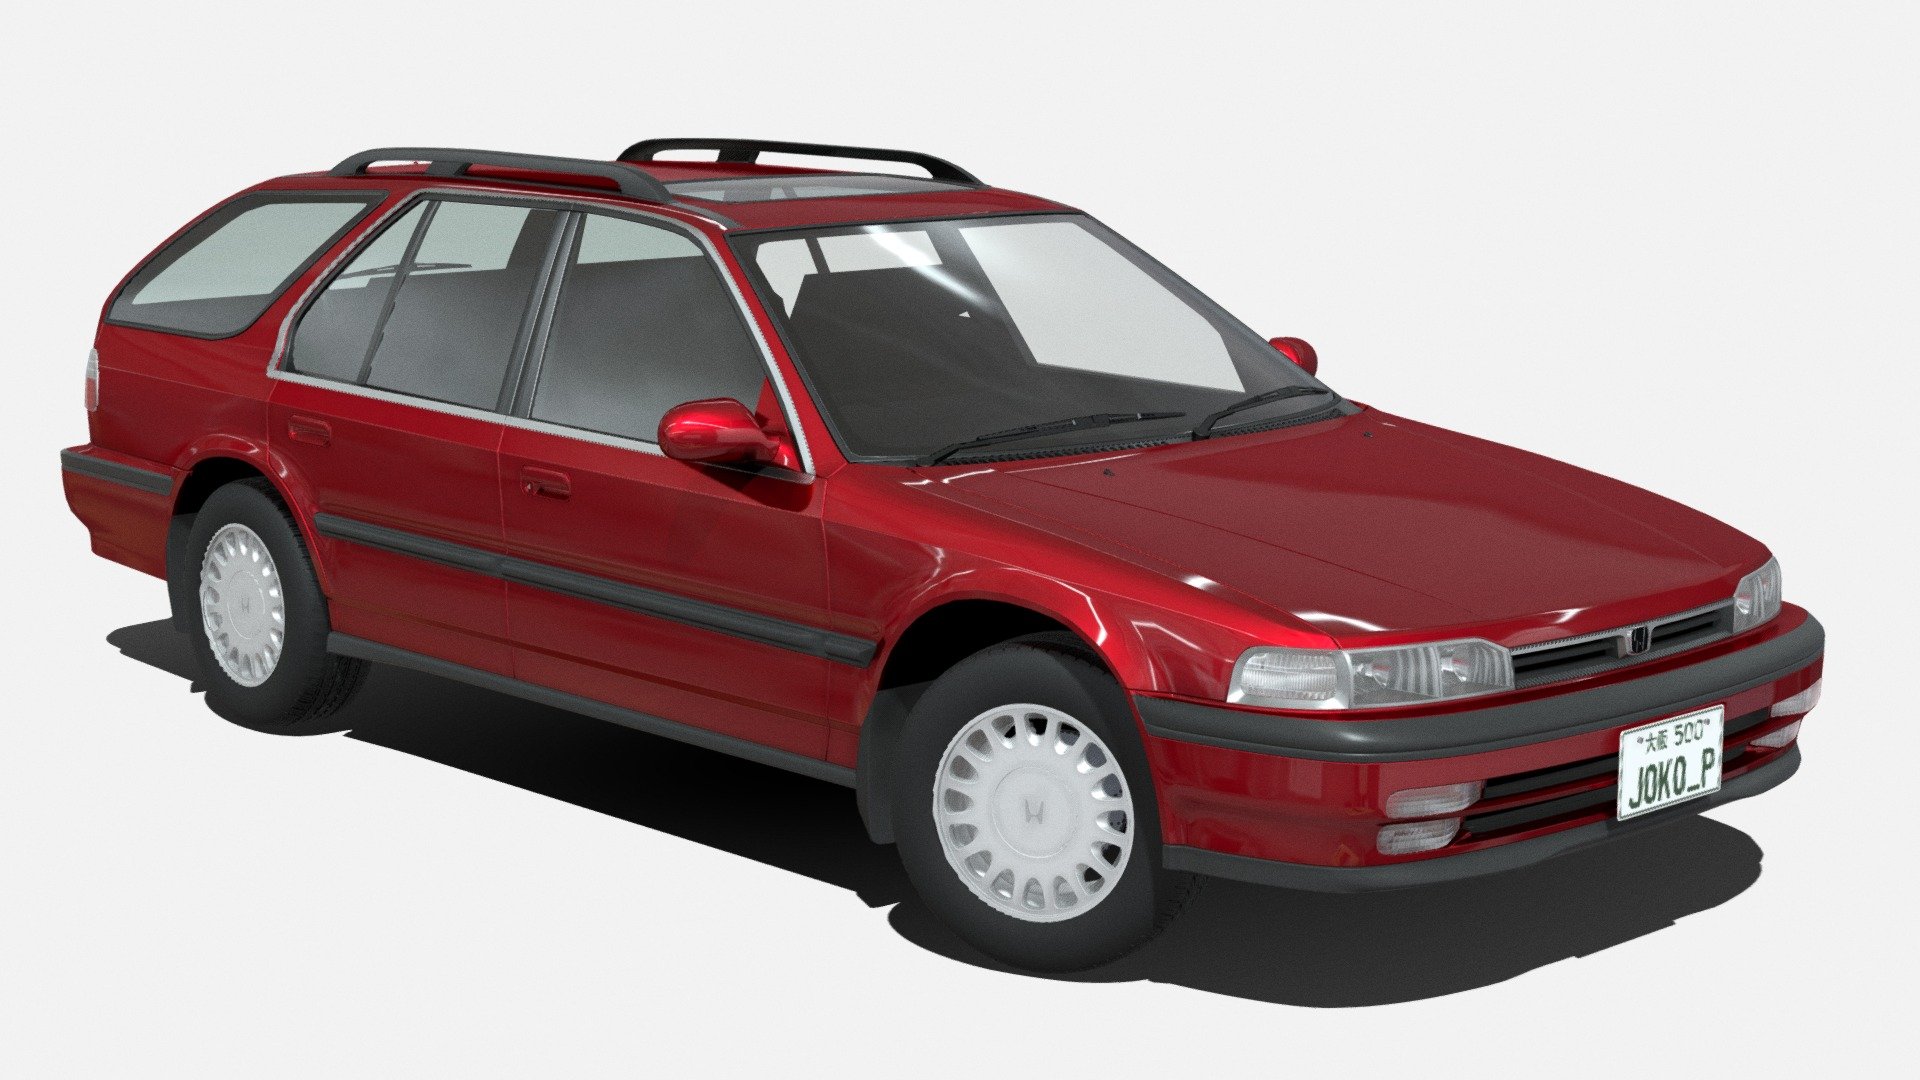 This is a Honda Accord CB9, also known as Honda Accord Maestro Wagon in my conutry. In USA I think they call them as &ldquo;1990-1993 Honda Accord Wagon